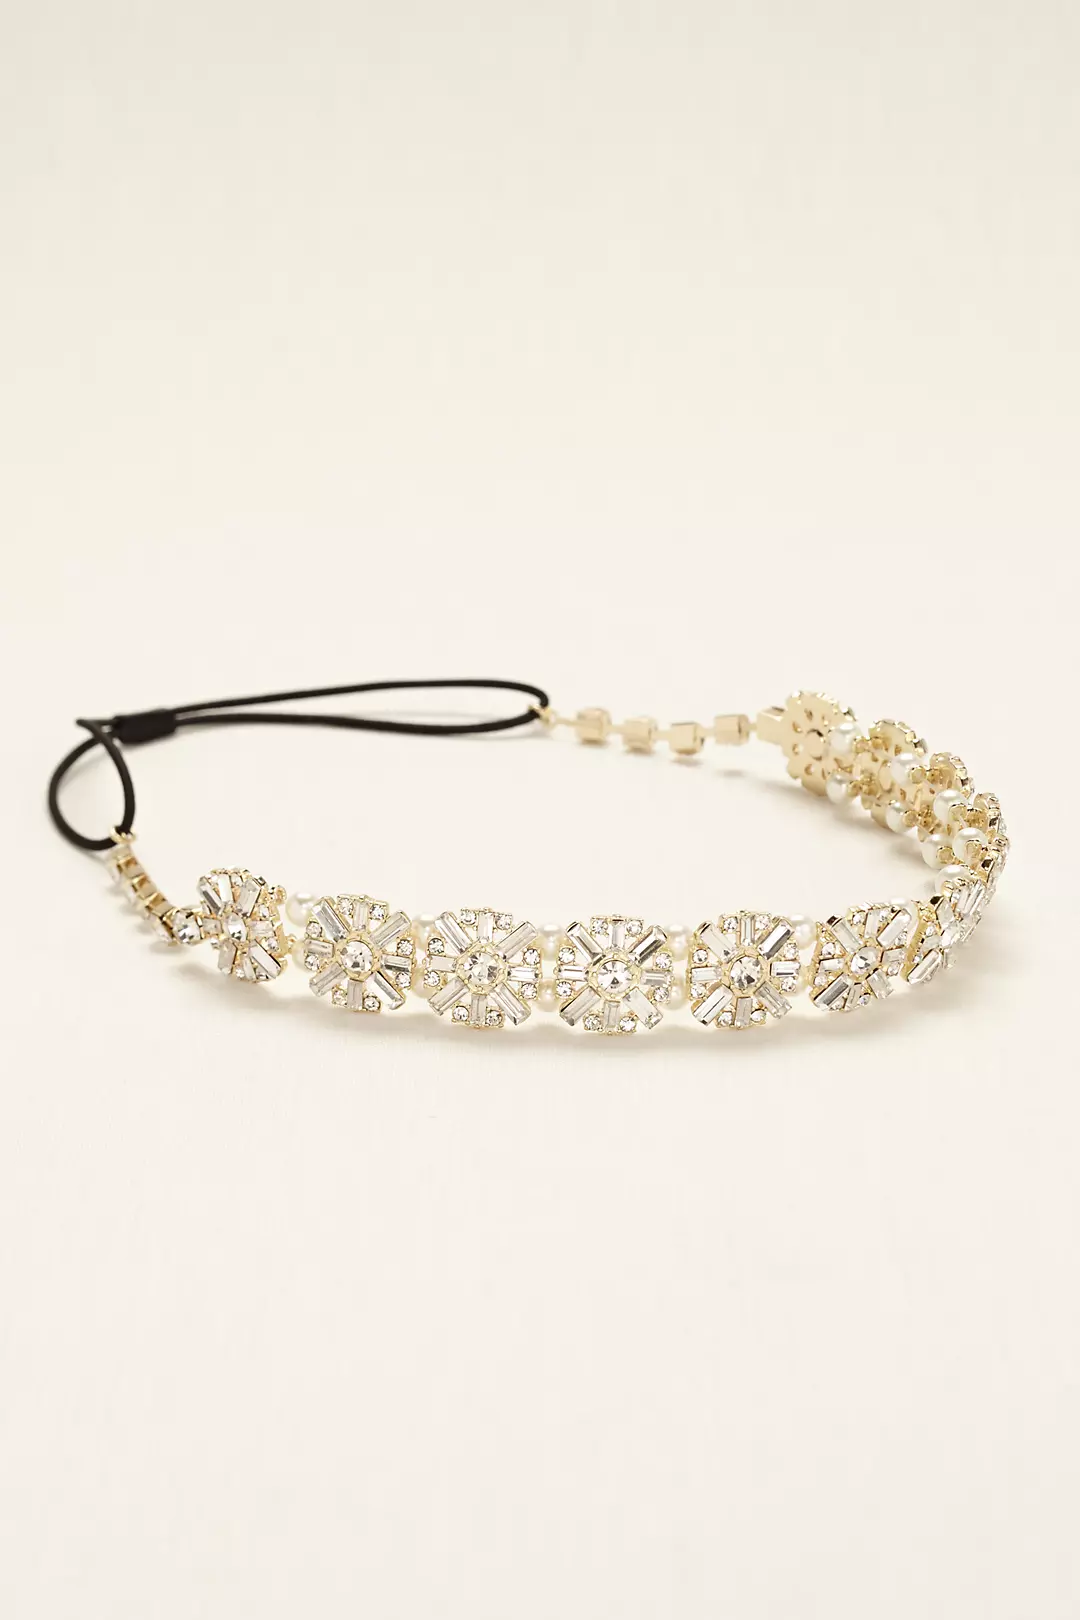 Headband with Crystal Baguettes and Pearls Image